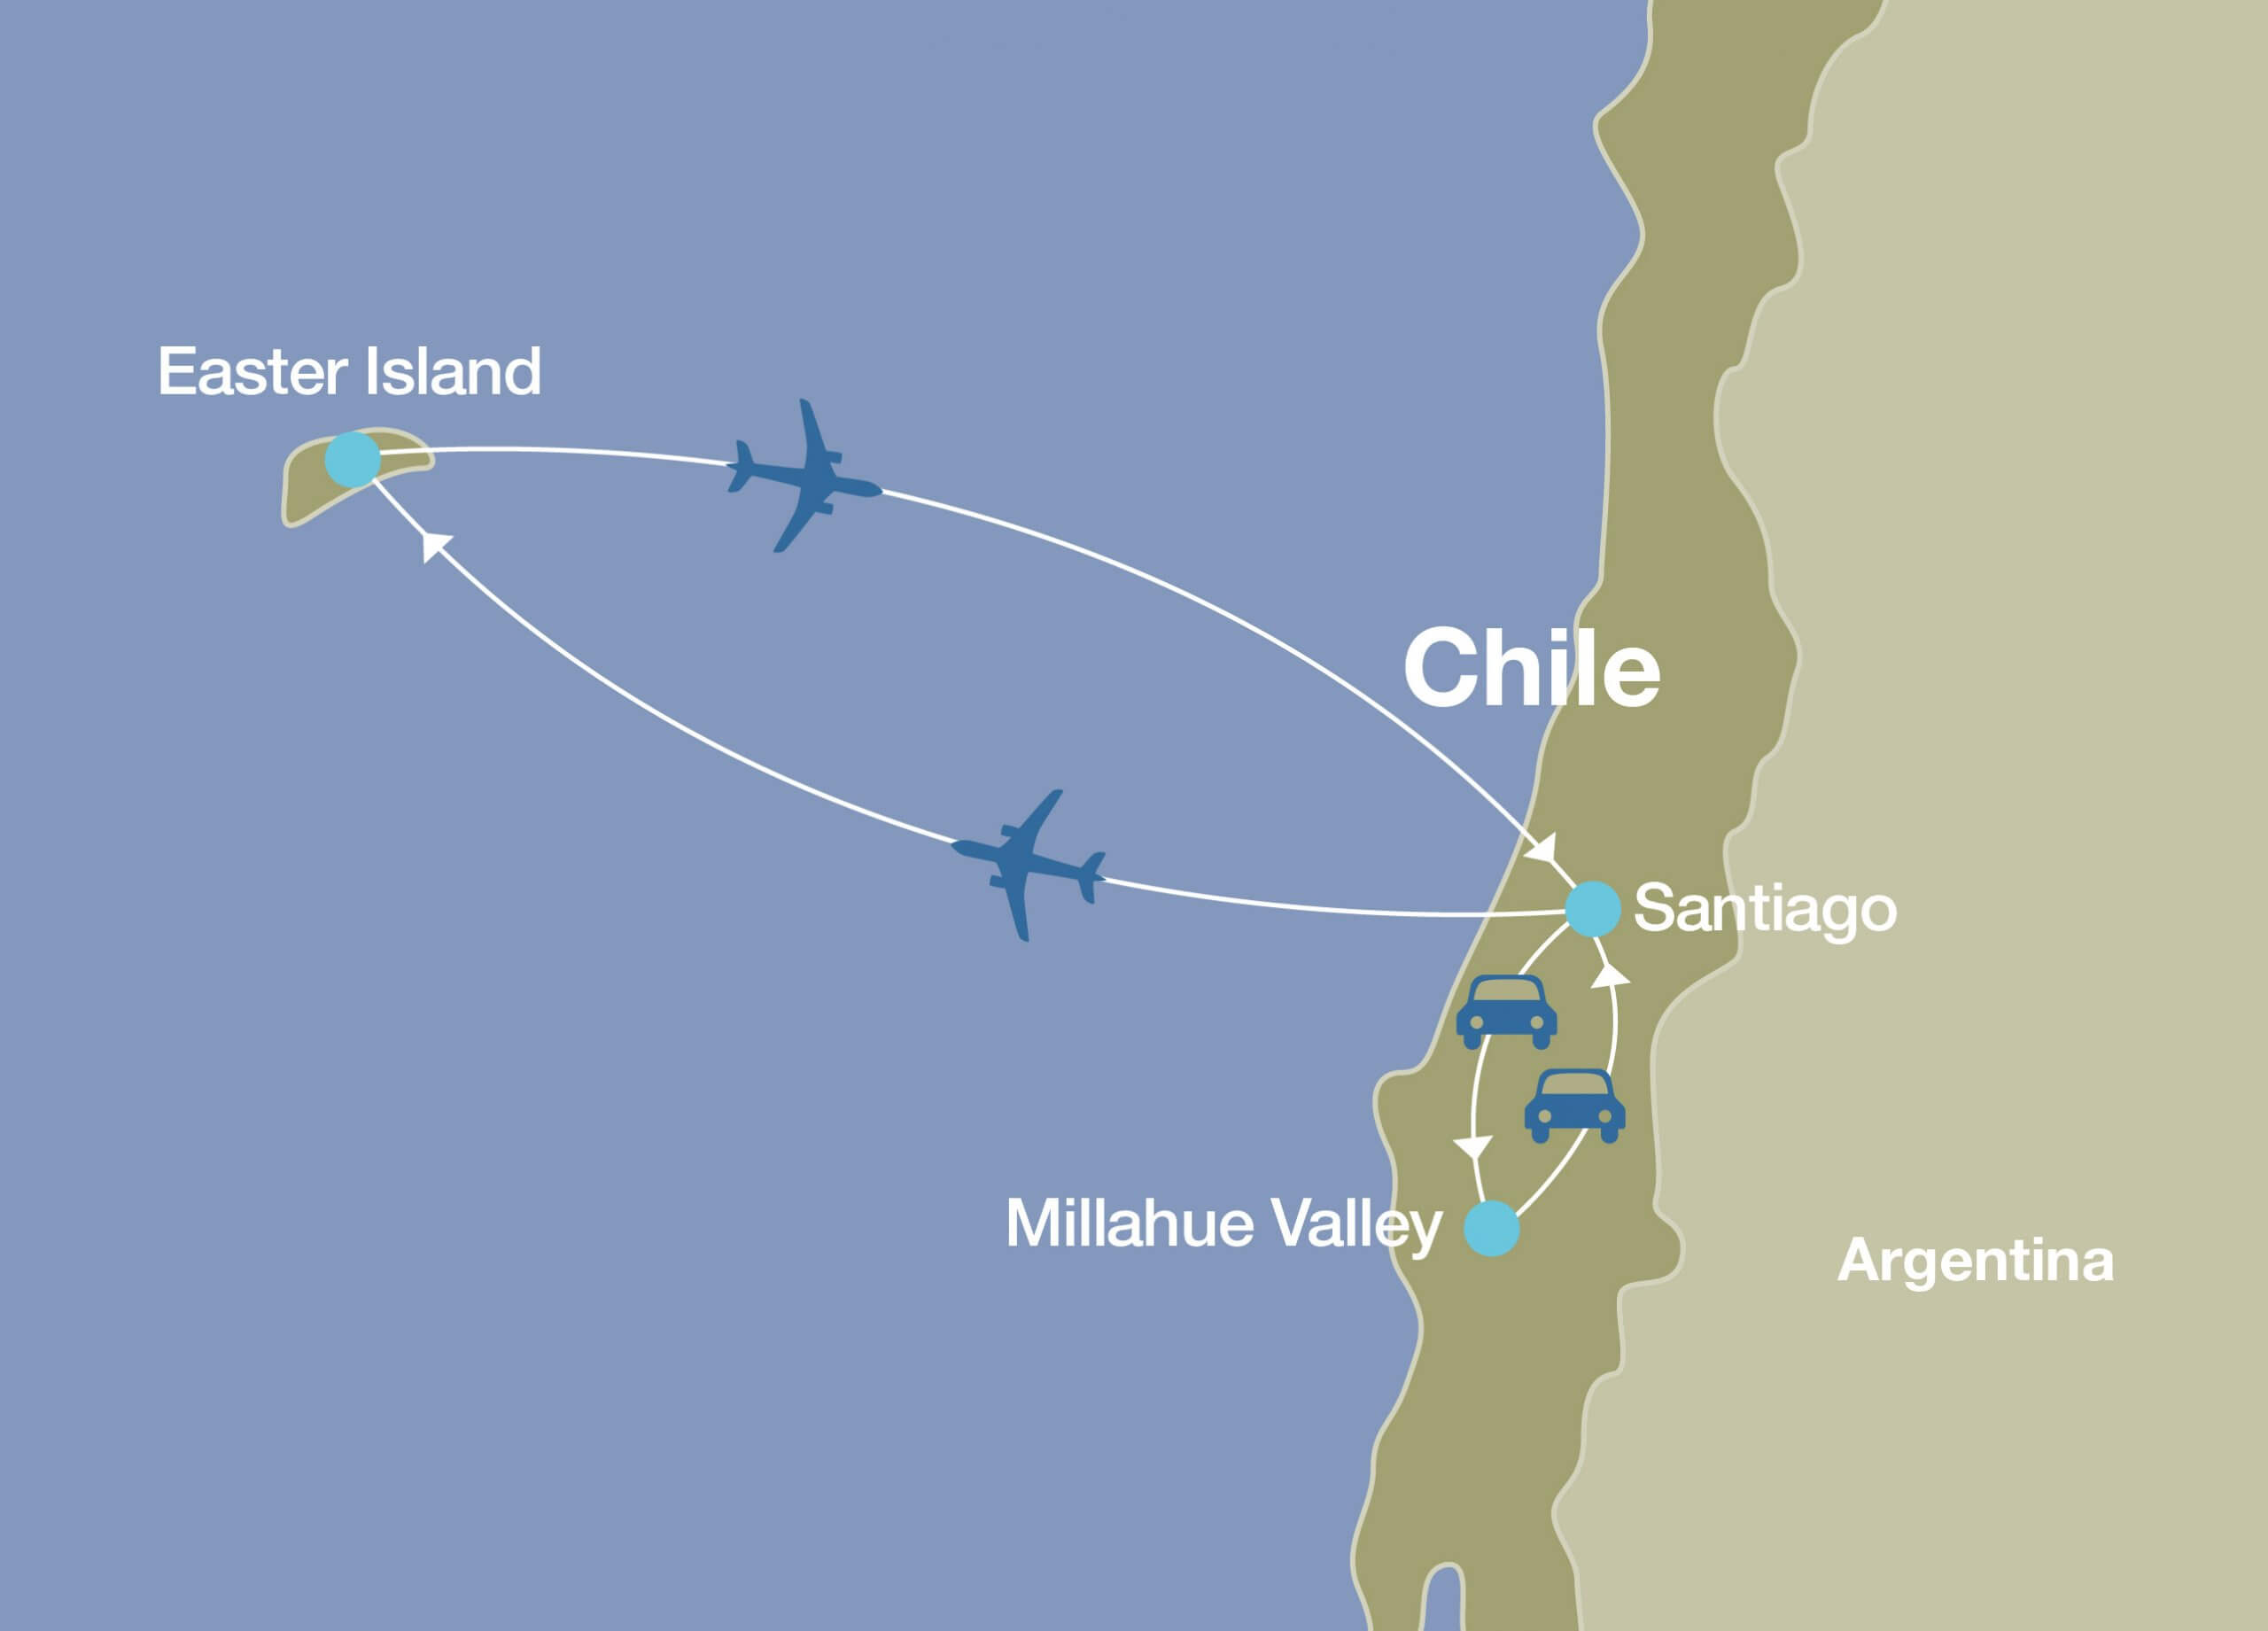 Map showing route, destinations, and methods of transportation of luxury Easter Island Tour in Chile